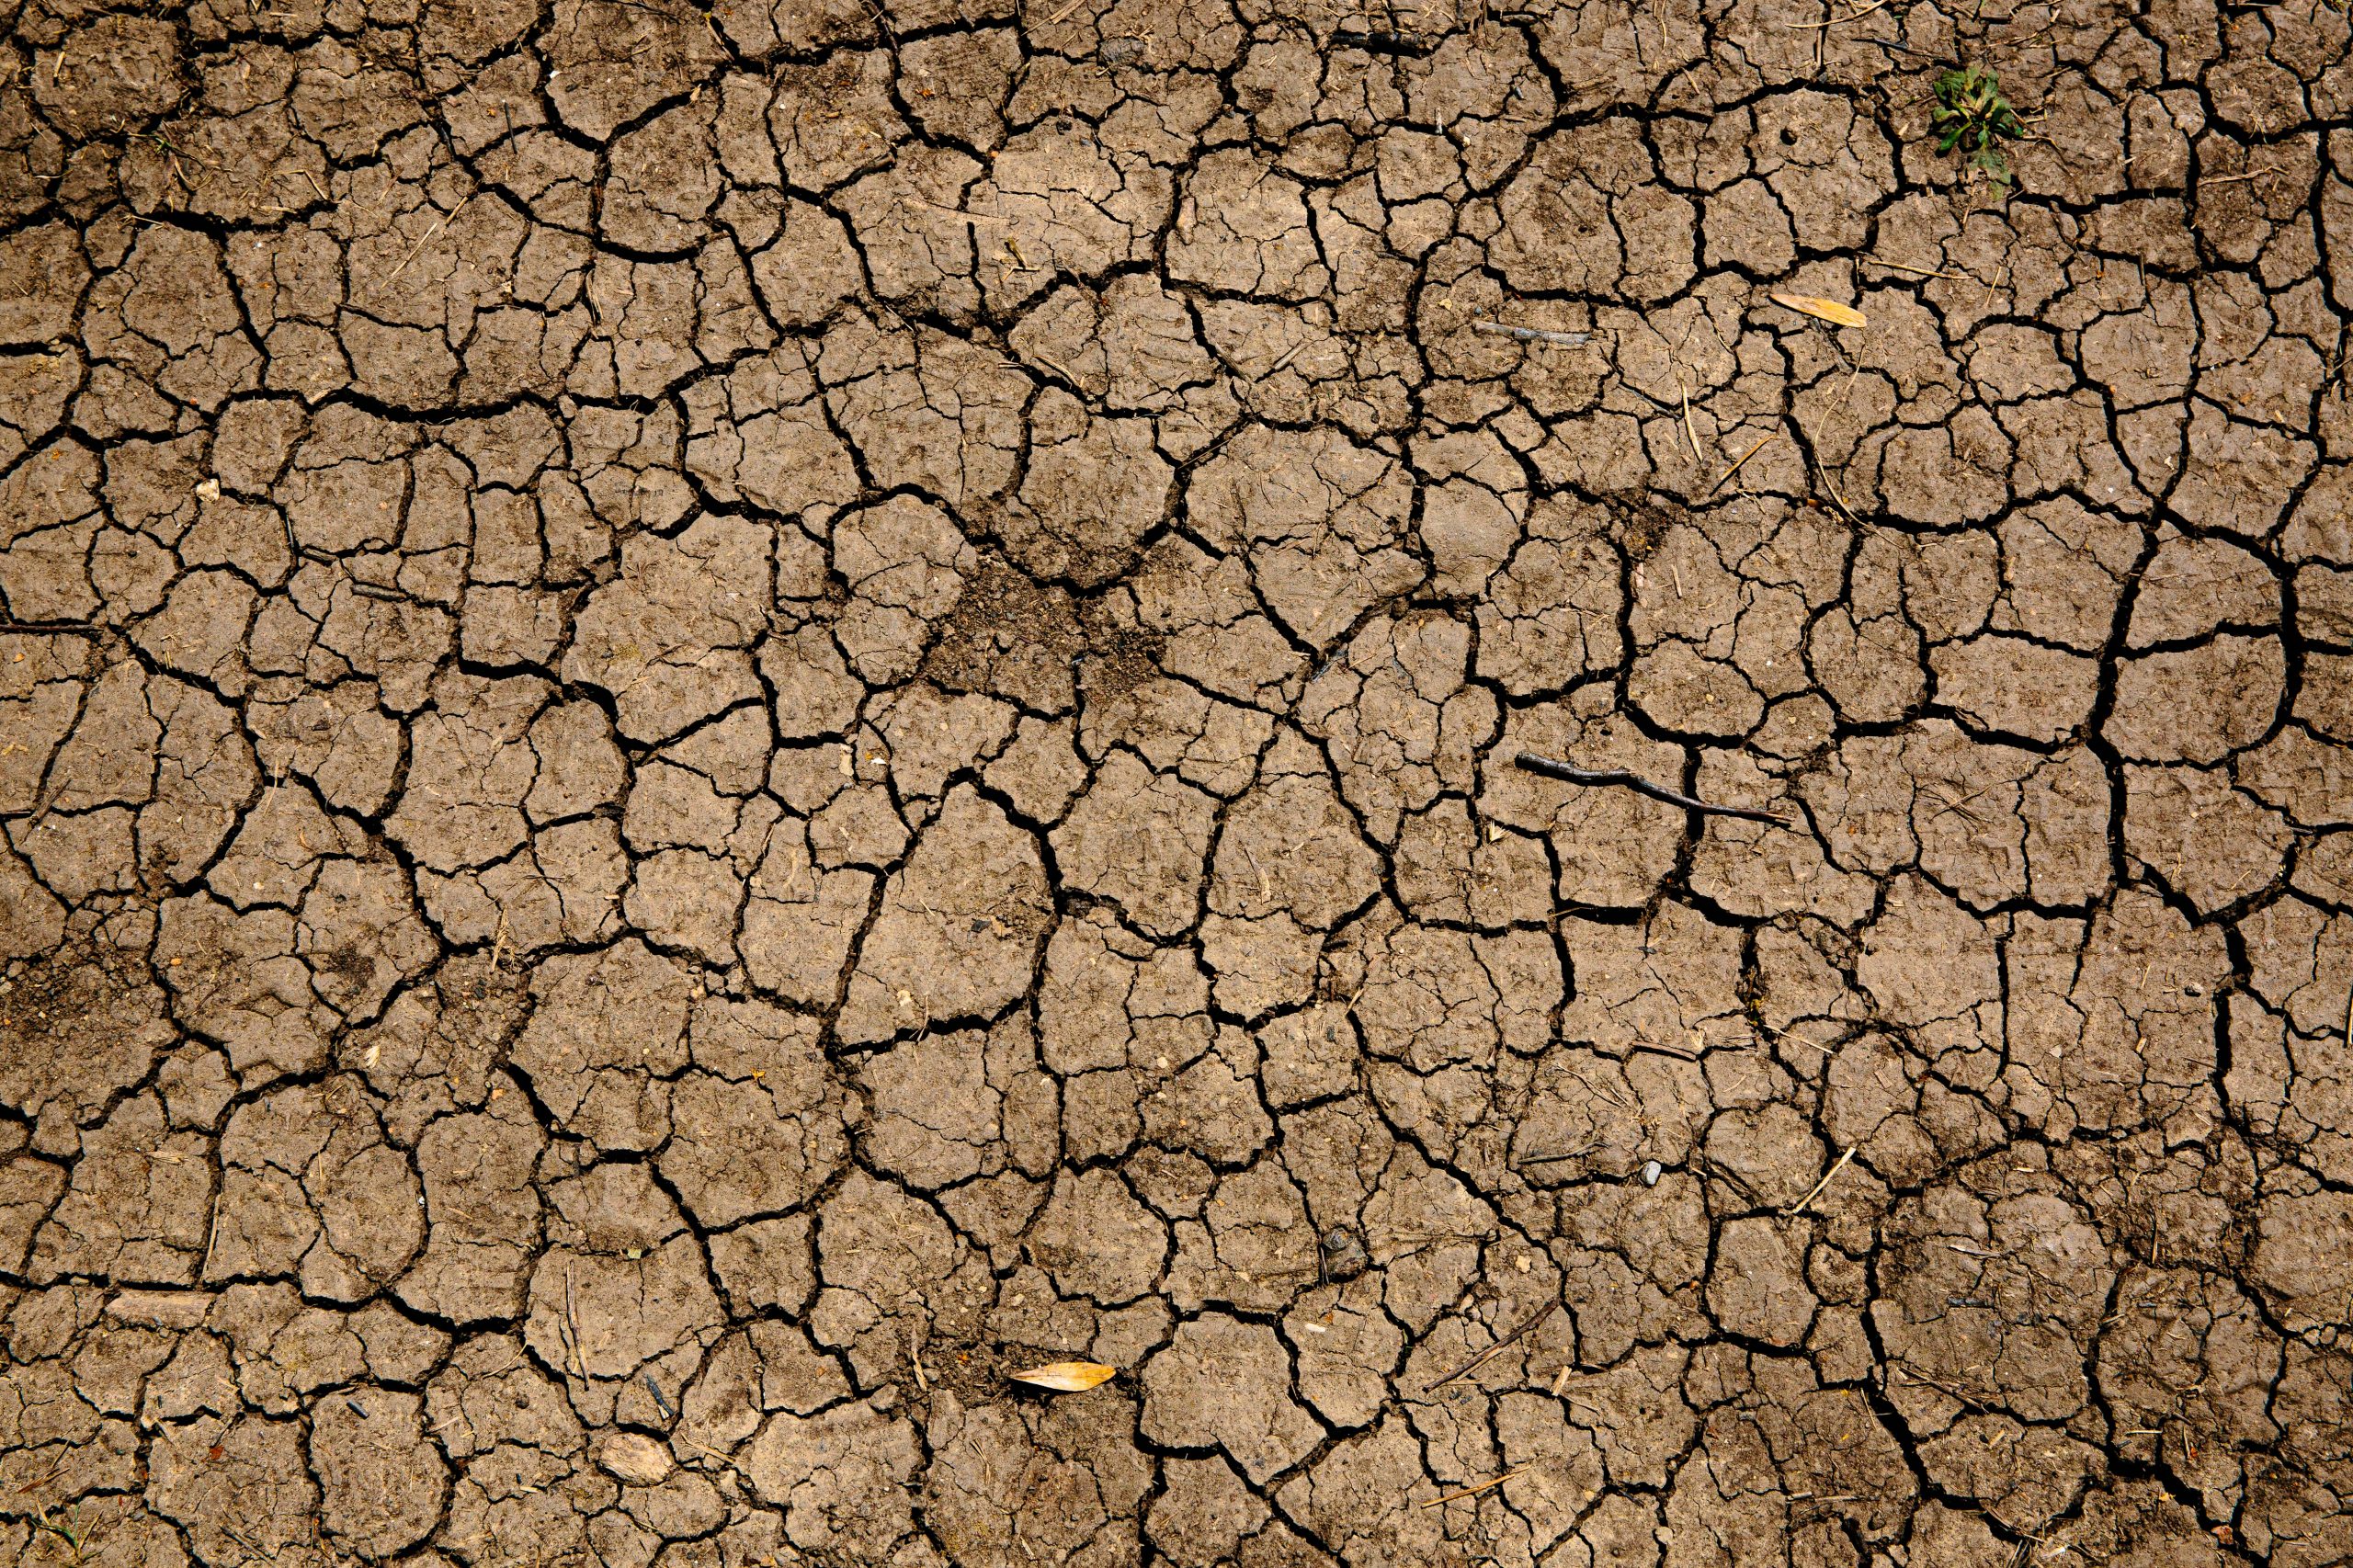 Spain’s ongoing drought is listed in the world’s top 10 ‘most expensive natural disasters’ of 2023